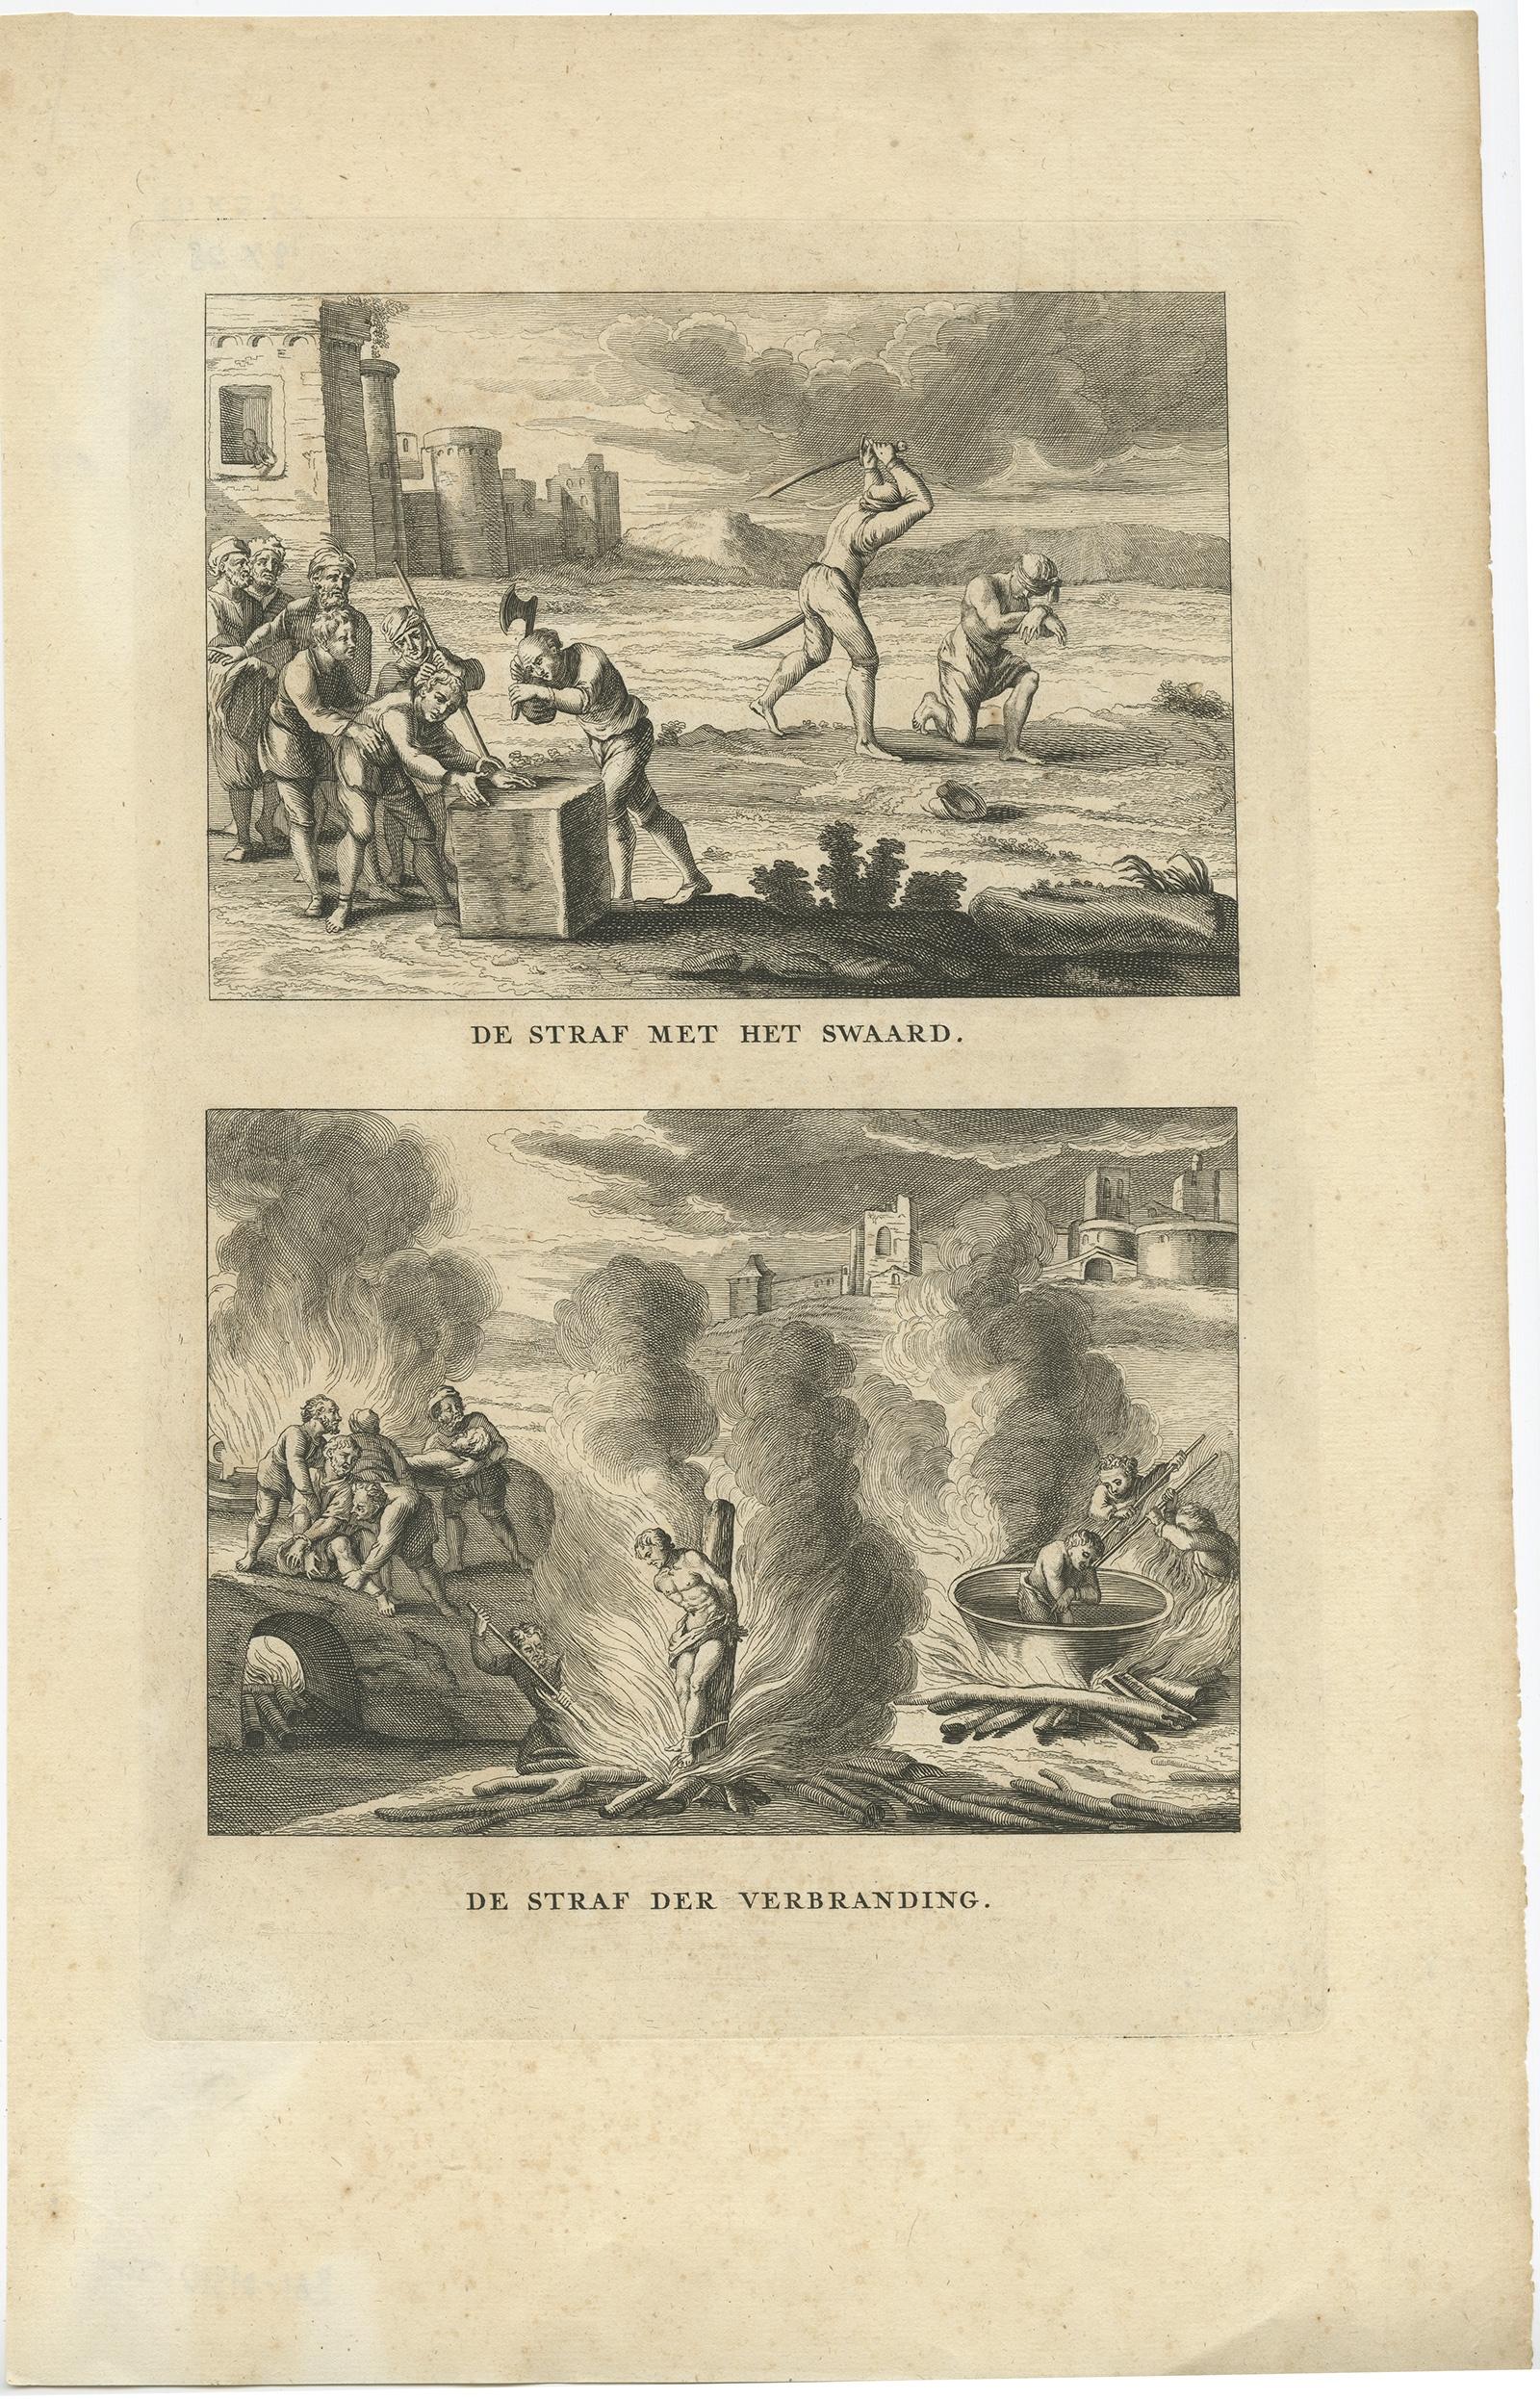 Two religious images on one sheet titled 'De straf met het Zwaard' and 'De Straf der Verbranding'. Punishment with the sword and fire. This print depicts religious punishments and originates from 'Byvoegzel tot het Algemeen Groot Historisch,